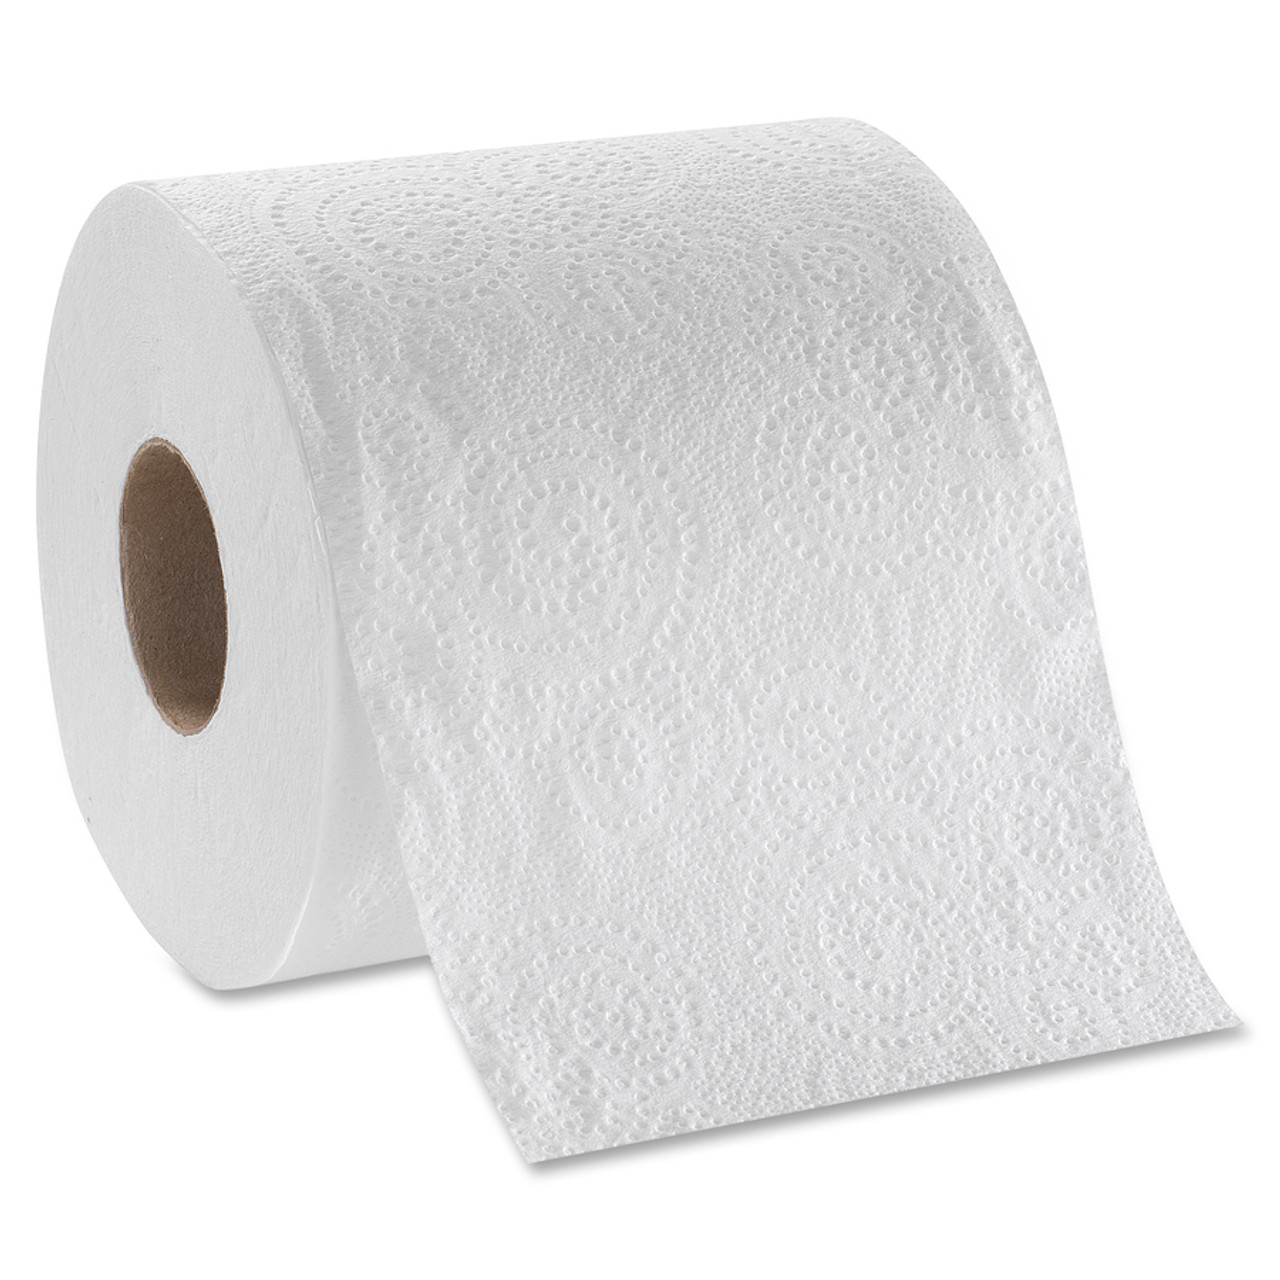 Angel Soft PS Ultra 2-Ply Premium Bathroom Tissue, Septic Safe, White, 400 Sheets Roll, 60-carton